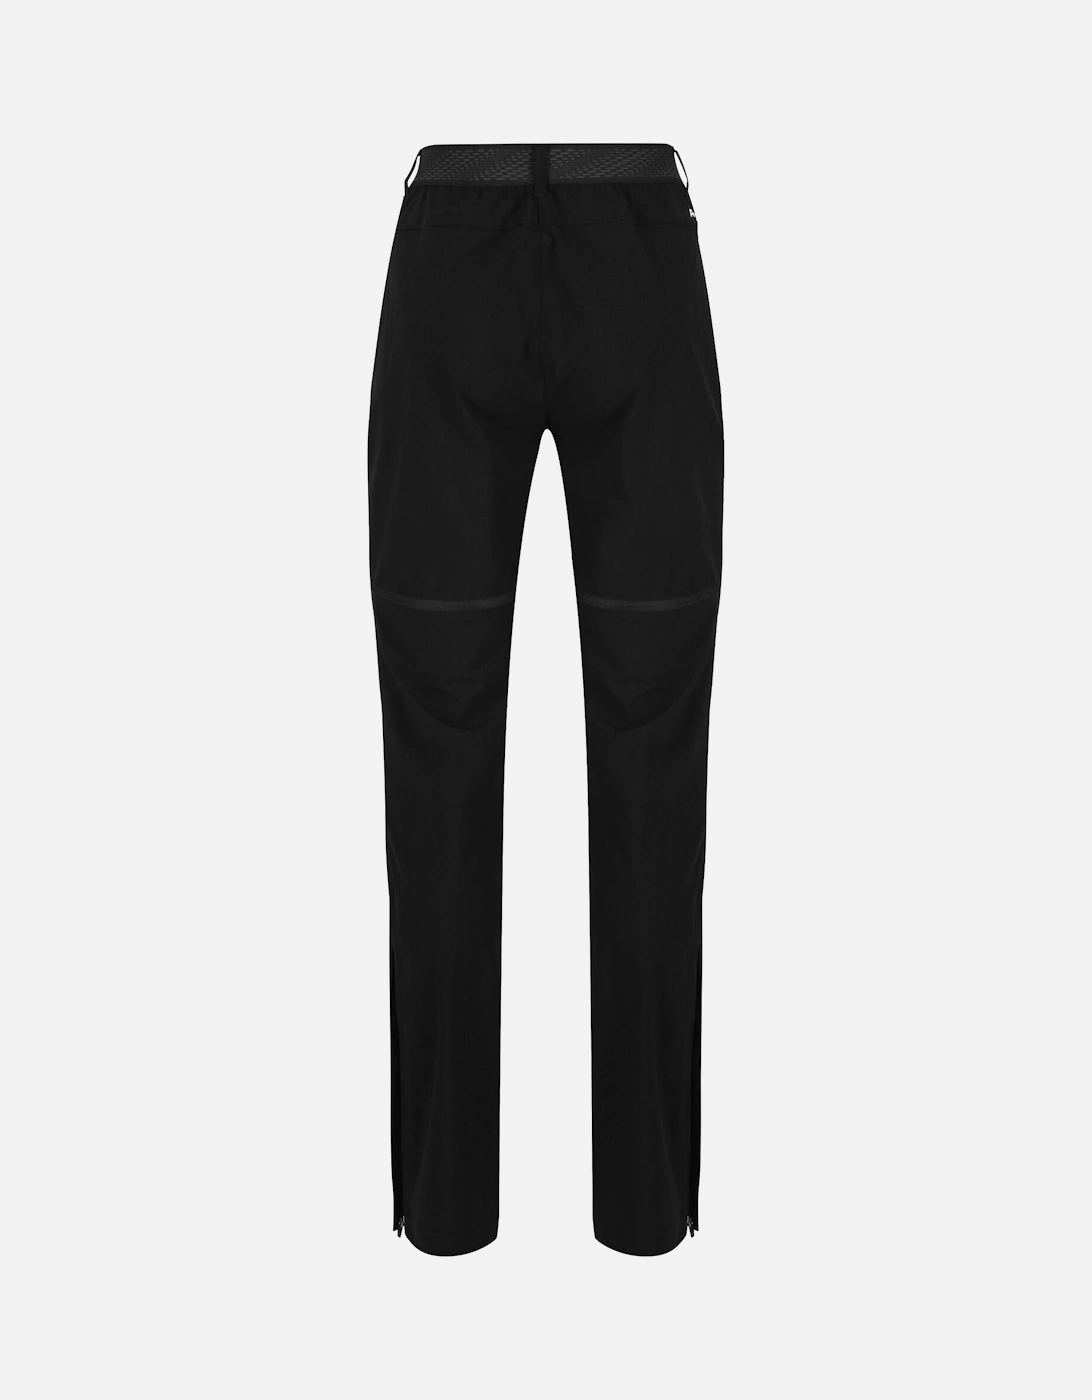 Womens/Ladies Mountain Zip-Off Trousers